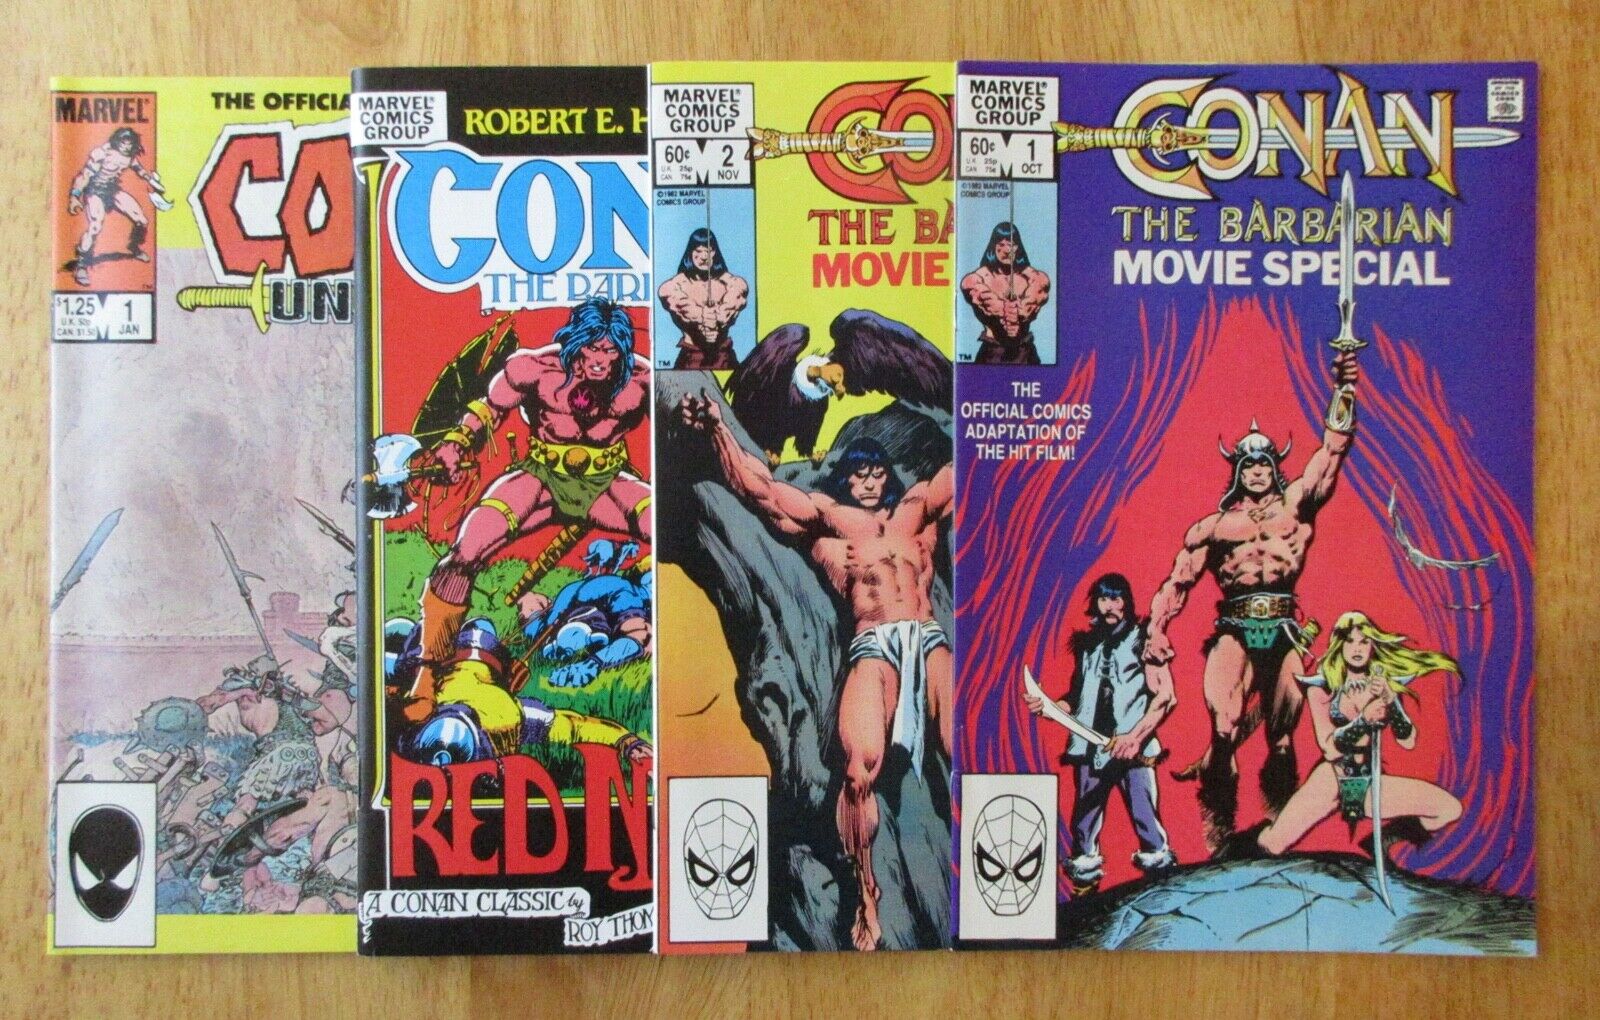 Lot of *4* CONAN THE BARBARIAN: Movie Special #1, 2 (1982) +Red Nails #1 +1!